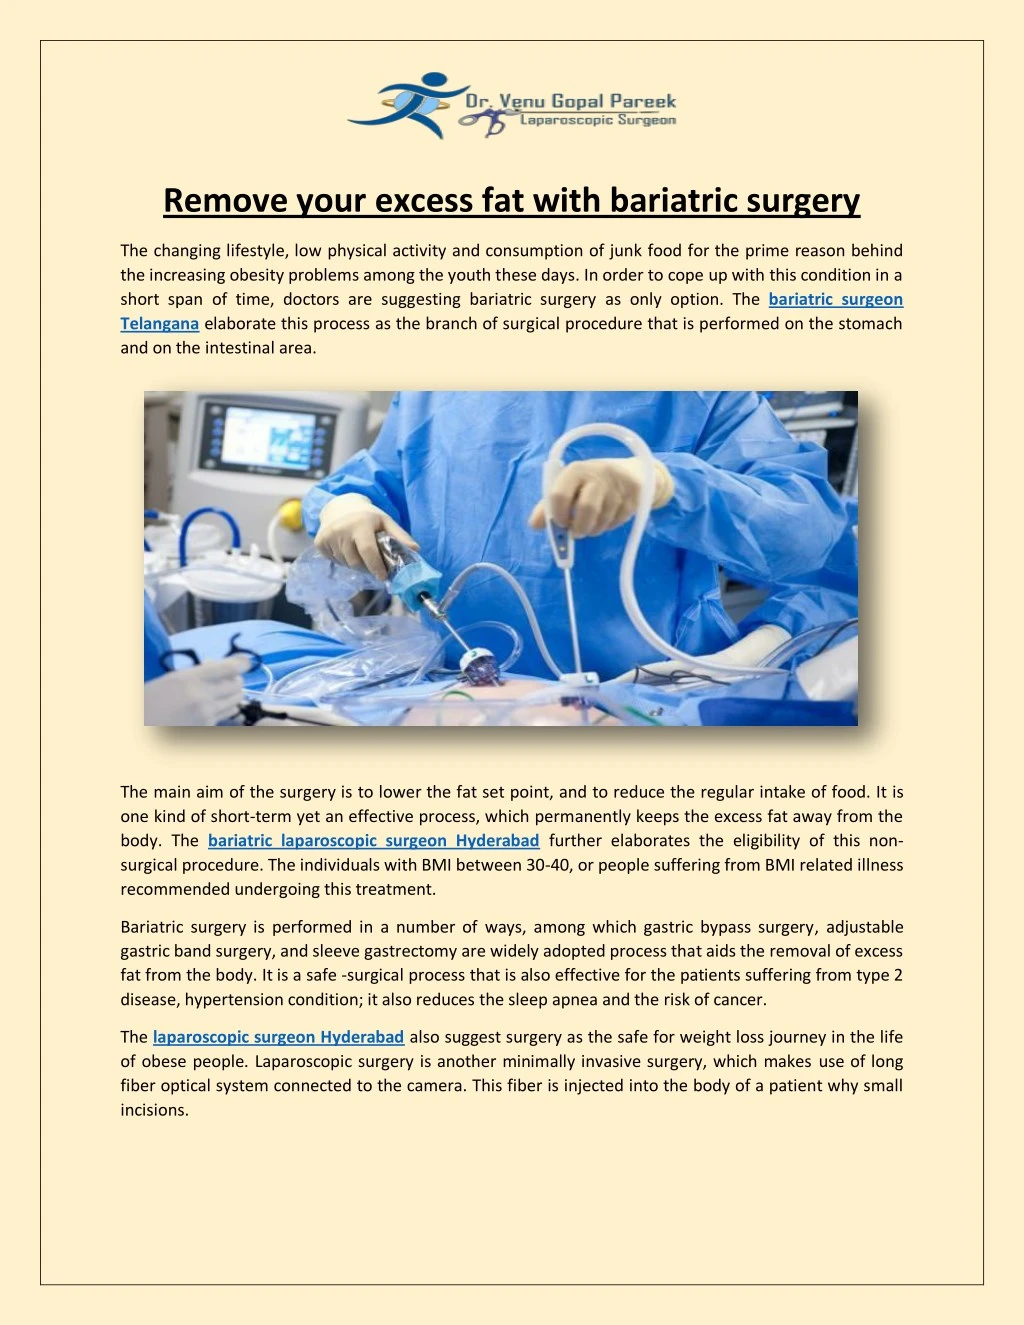 remove your excess fat with bariatric surgery